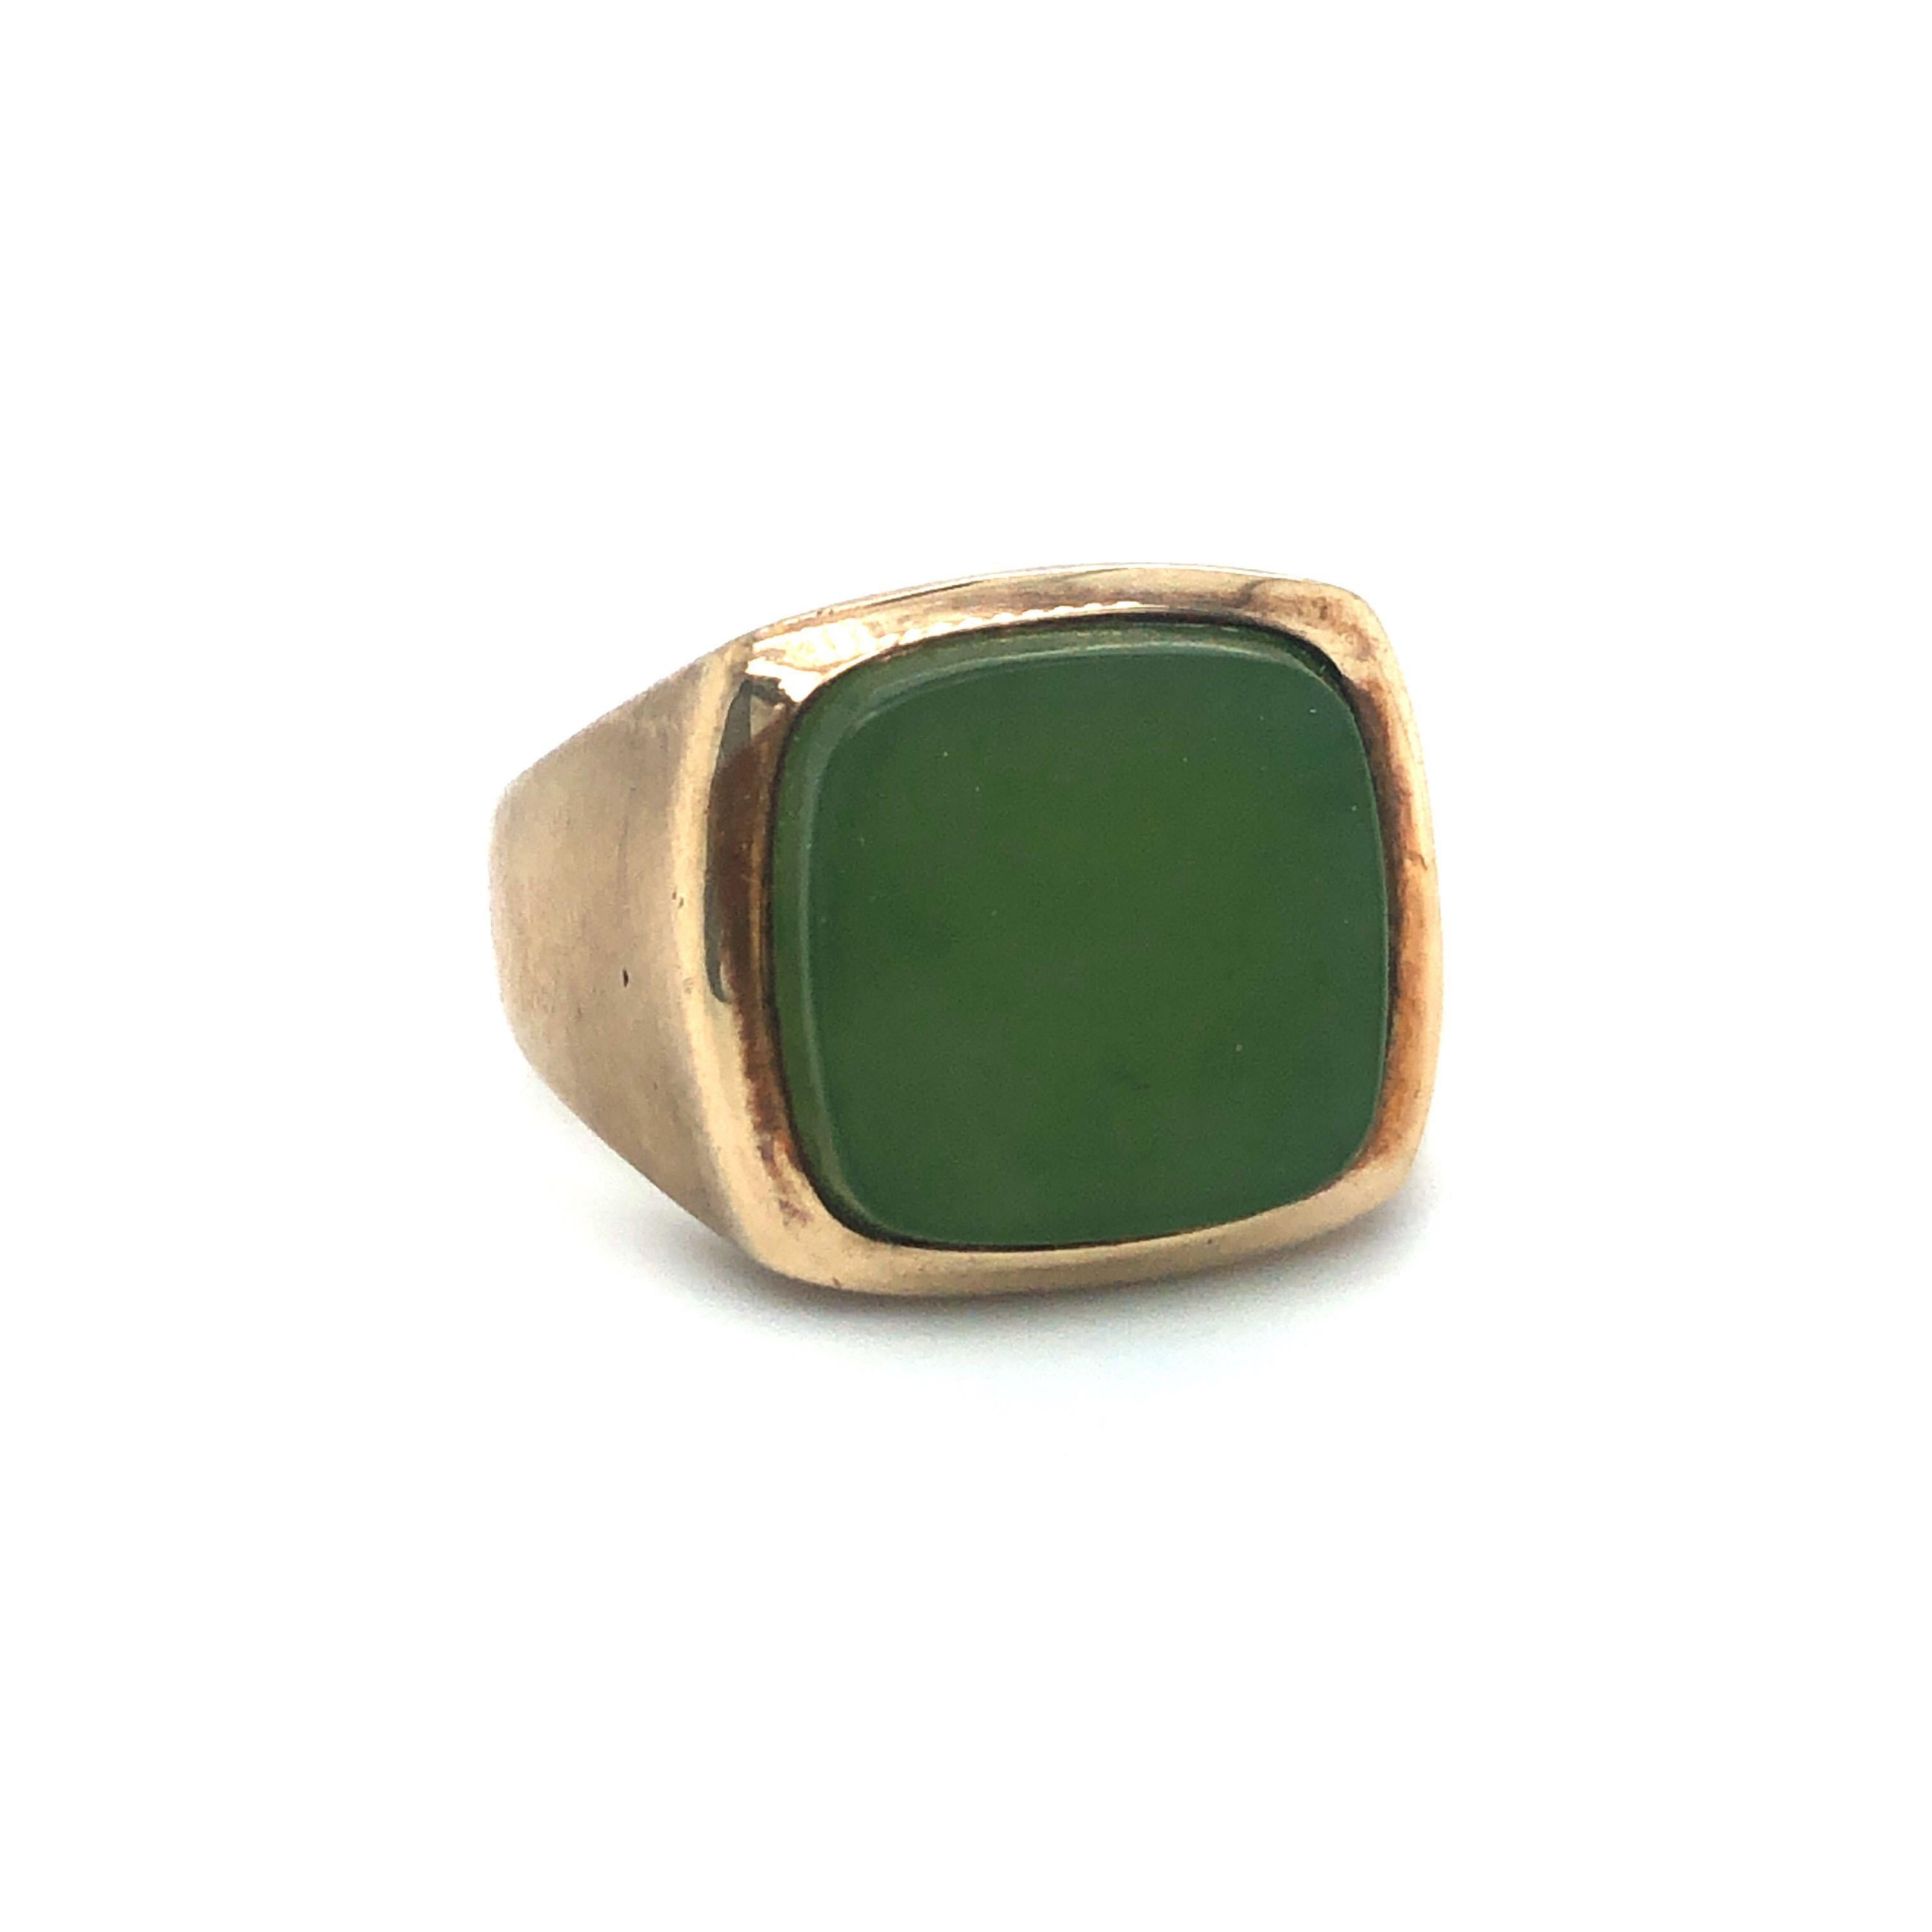 10k Yellow Gold Vintage Nephrite Jade Signet Ring Size 10.5

Condition:  Excellent Condition, Professionally Cleaned and Polished
Metal:  10k Gold (Marked, and Professionally Tested)
Gemstone:  13mm x 13mm Tablet Cut Nephrite Jade Stone
Size: 